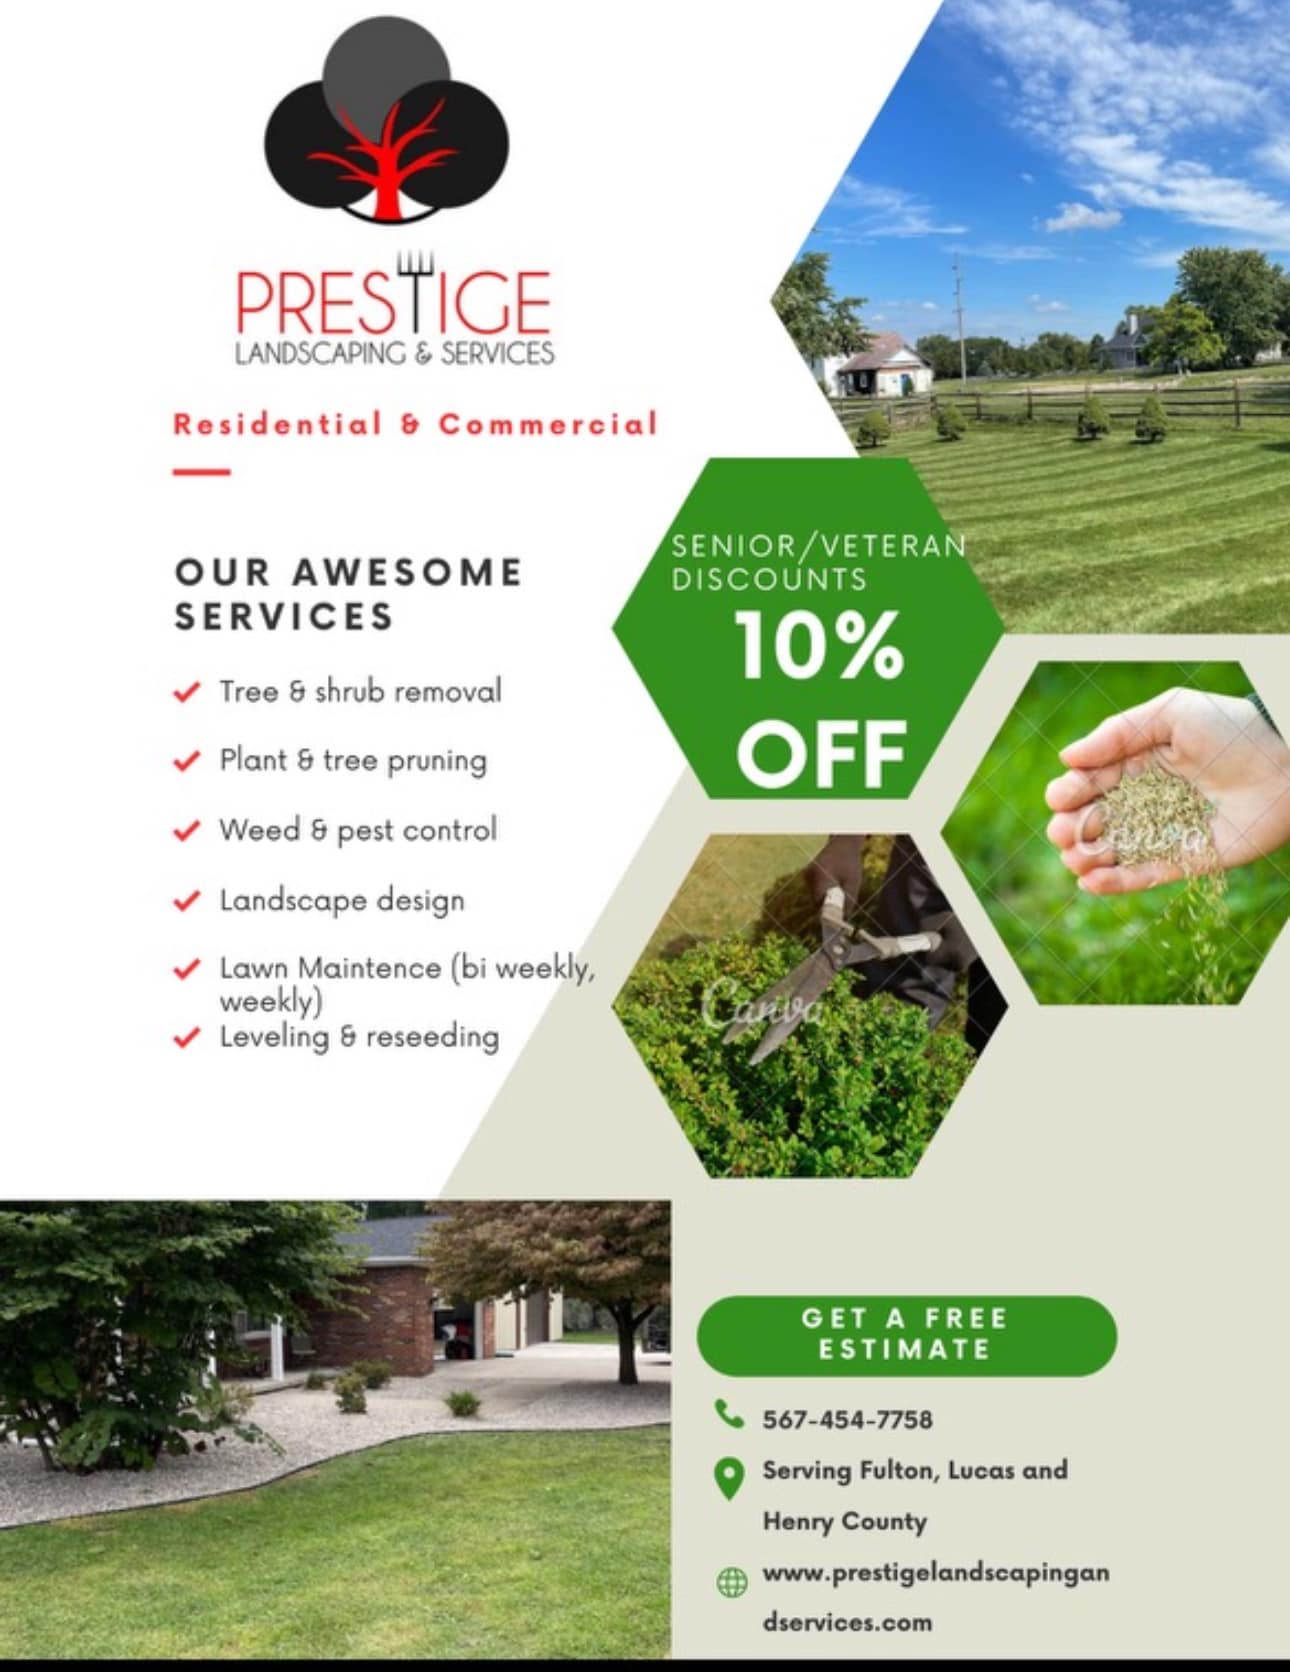 Prestige Landscaping & Services 414 Cherry St, Wauseon Ohio 43567